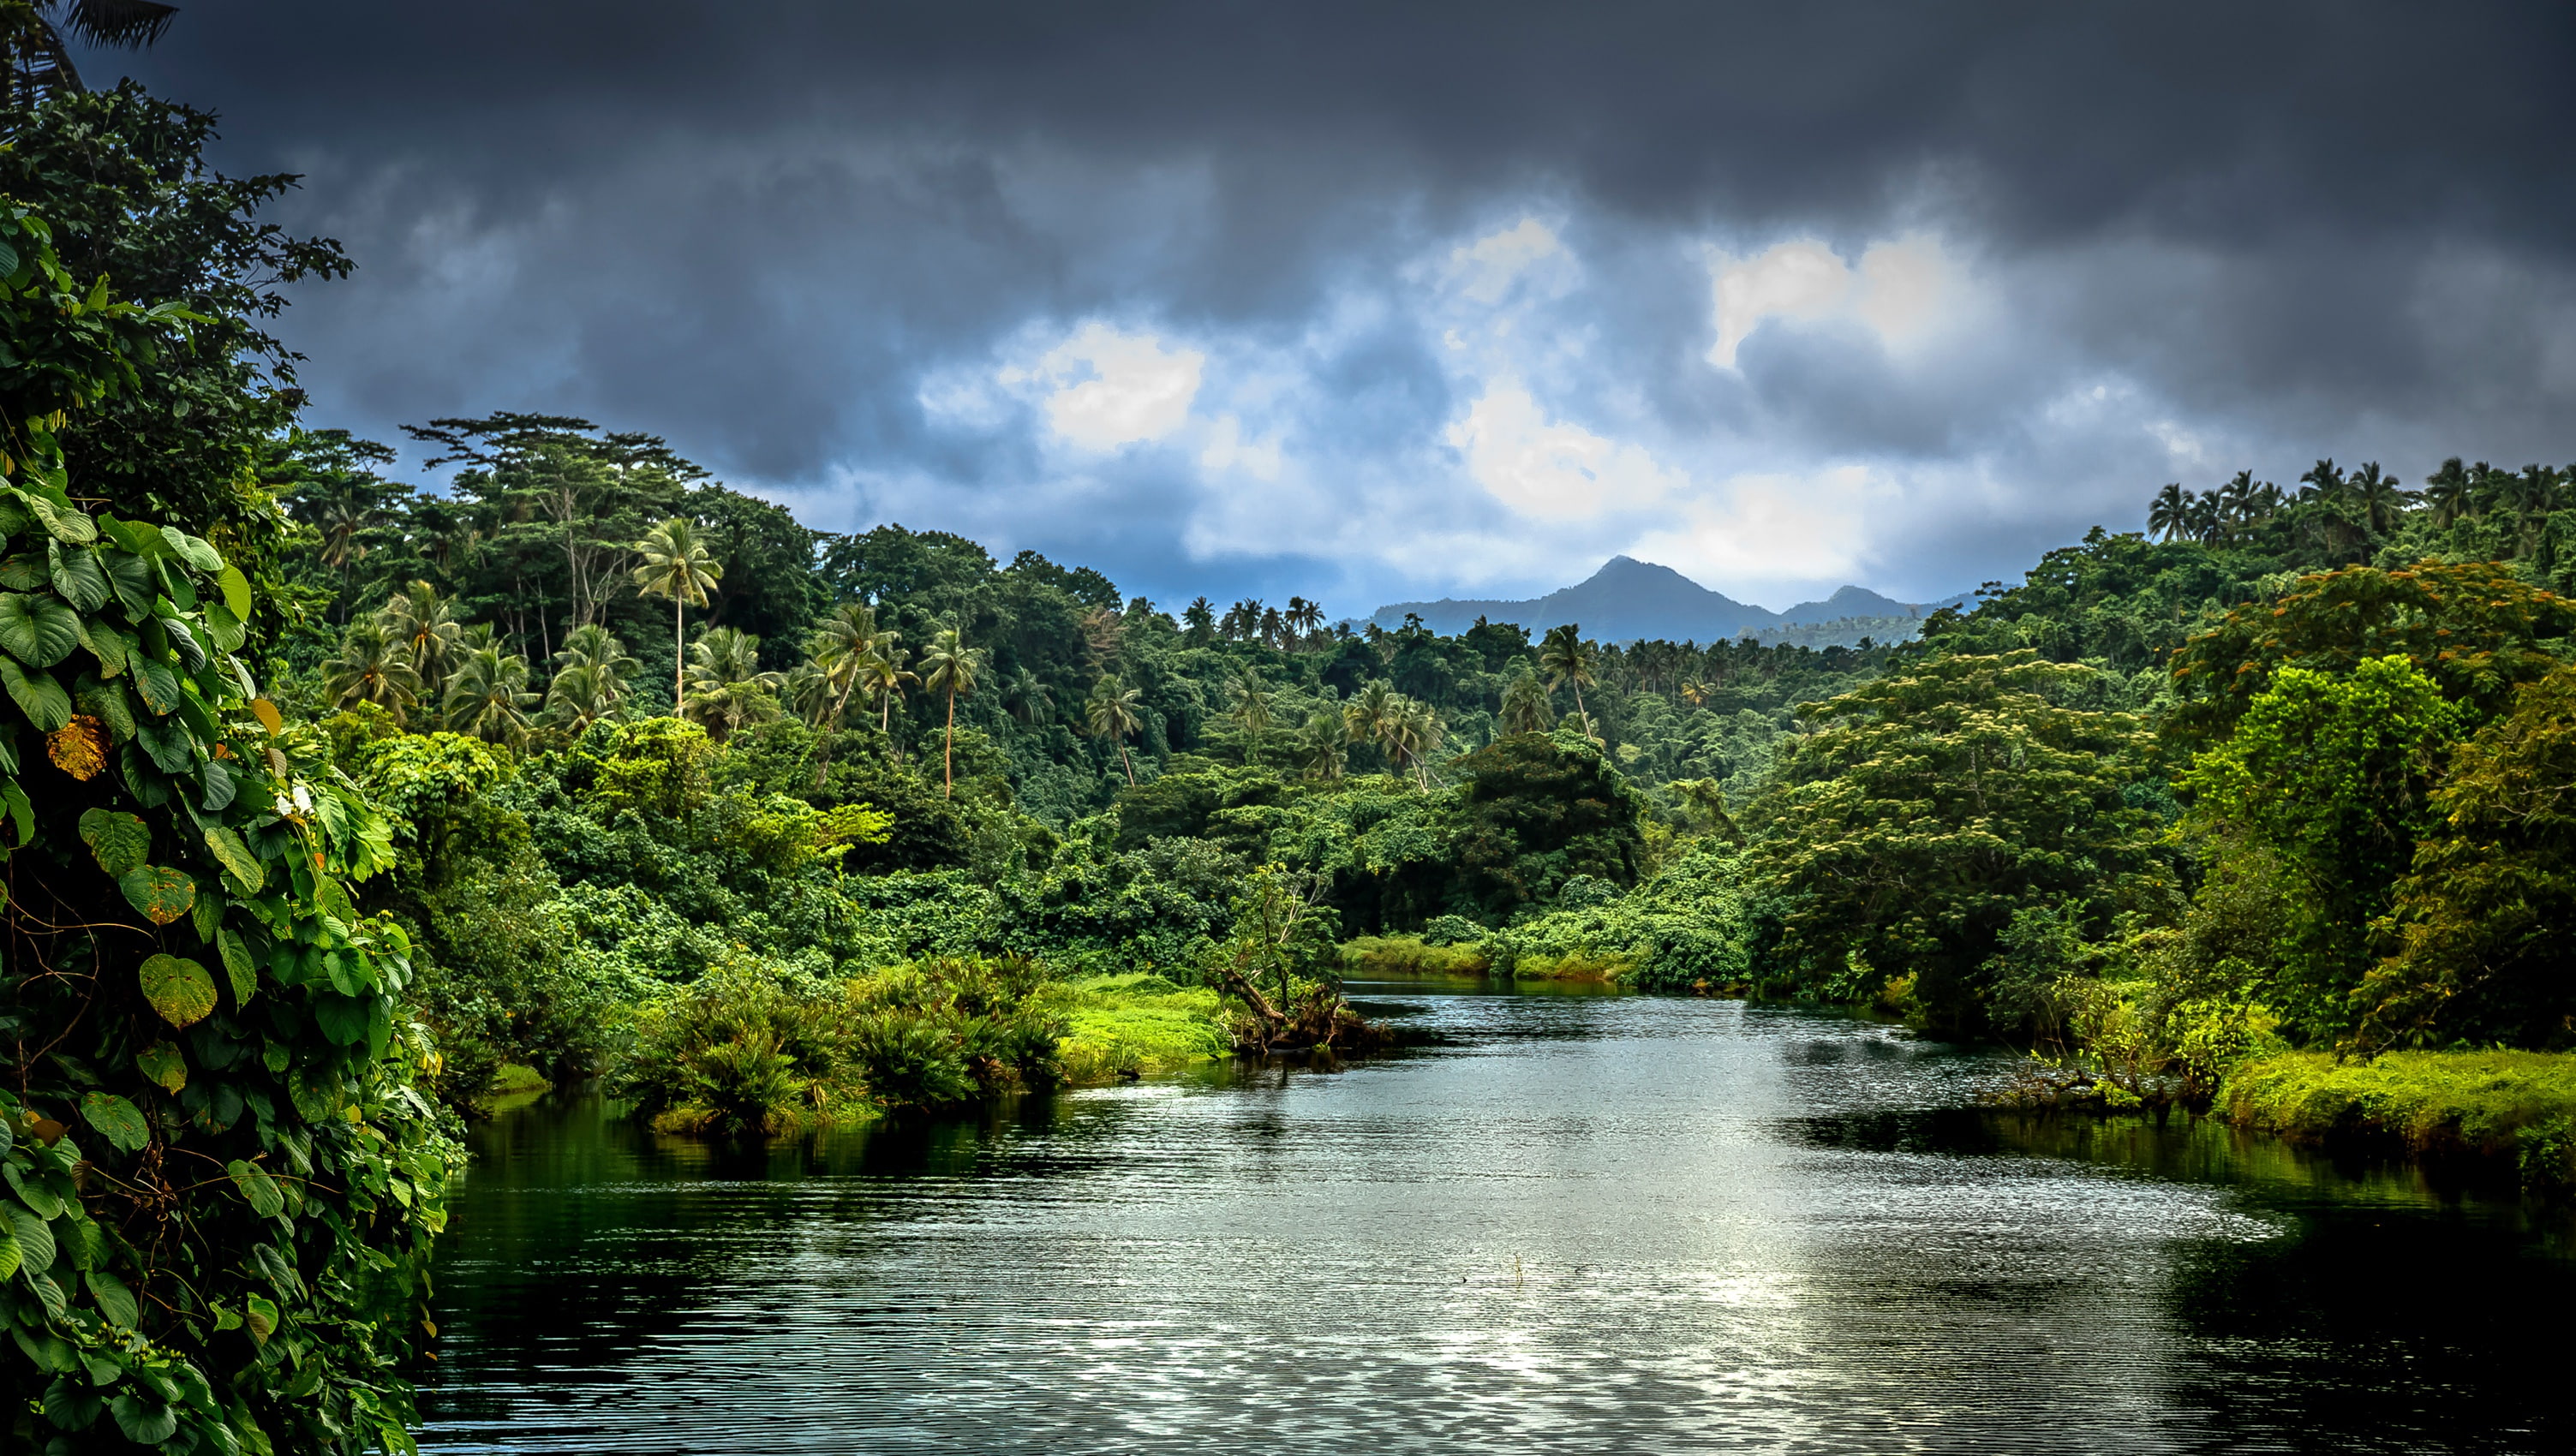 greens, forest, clouds, trees, mountains, tropics, river, palm trees